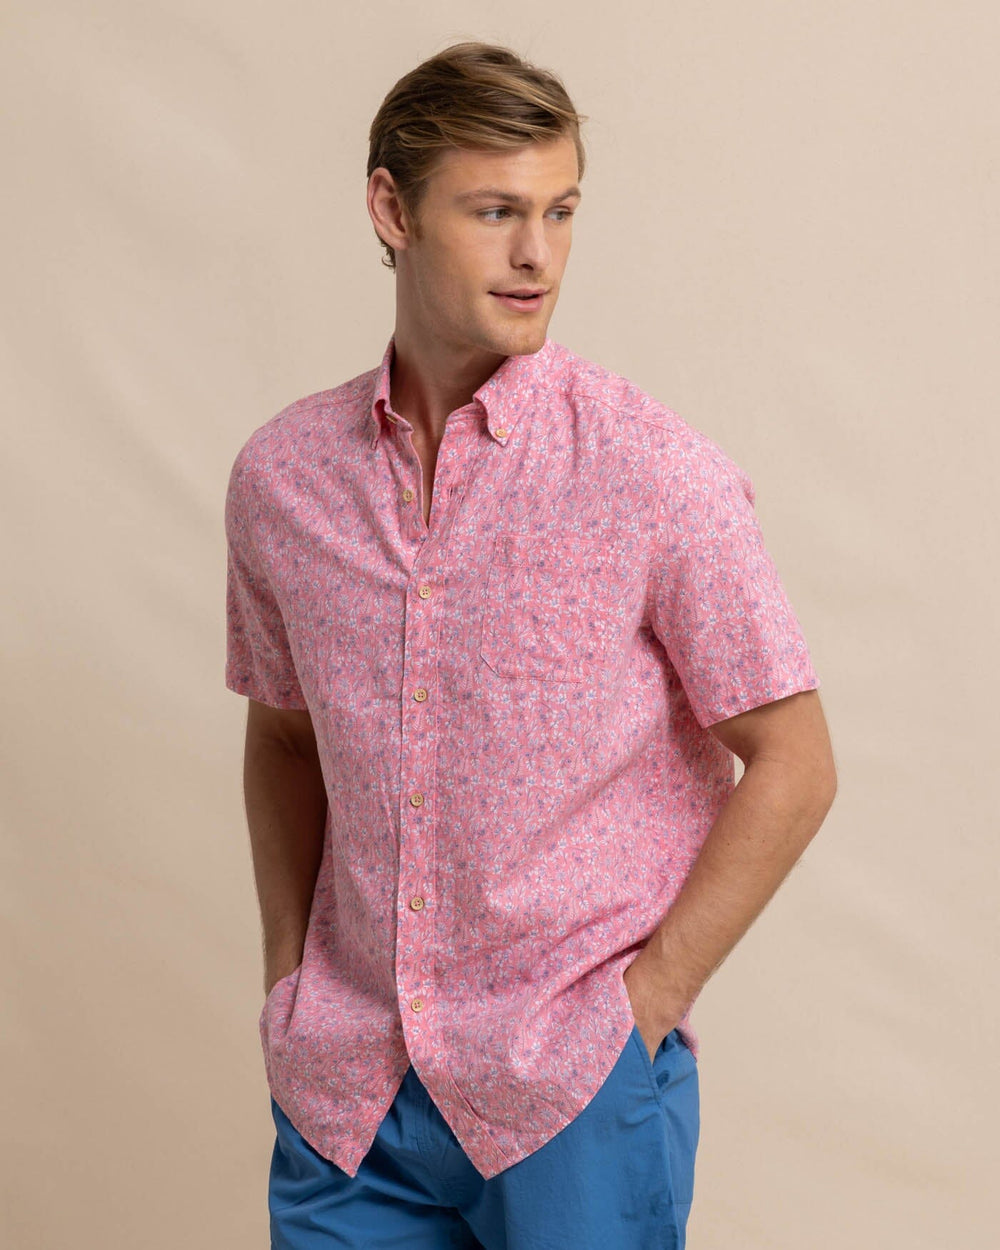 The front view of the Southern Tide Linen Rayon Ditzy Floral Short Sleeve Sport Shirt by Southern Tide - Geranium Pink